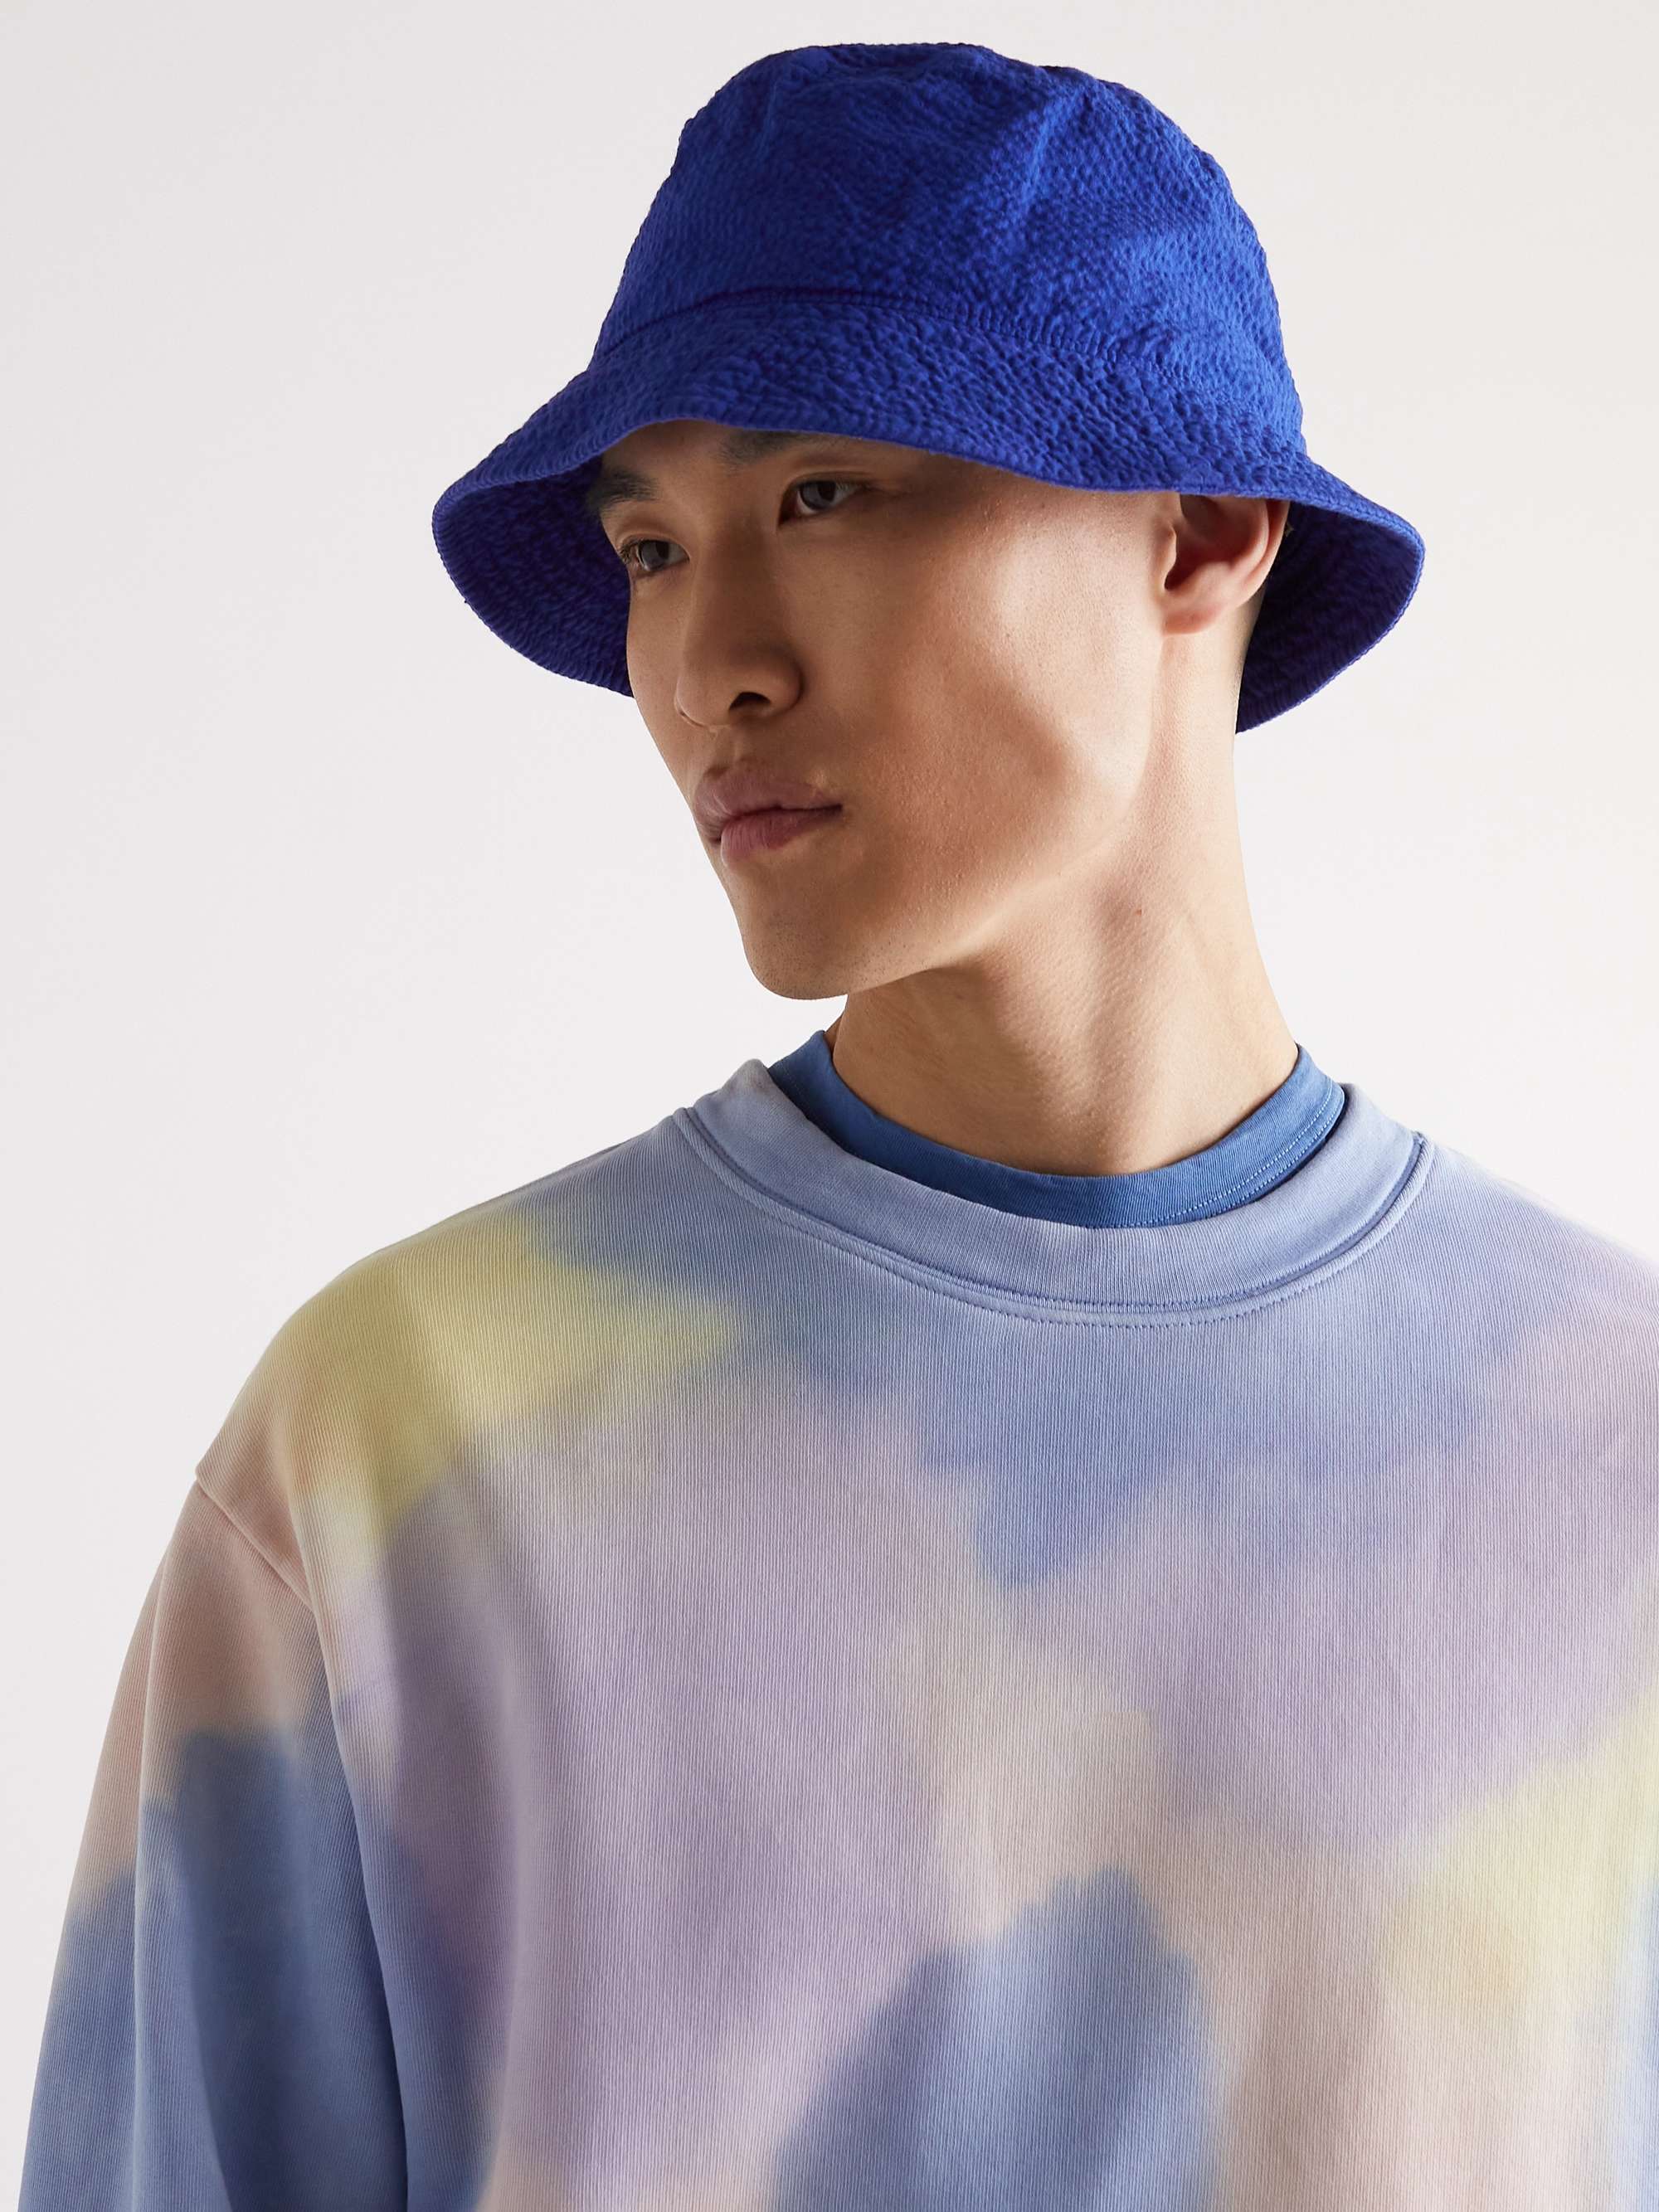 Navy Embroidered GORE-TEX Bucket Hat | NANAMICA | MR PORTER